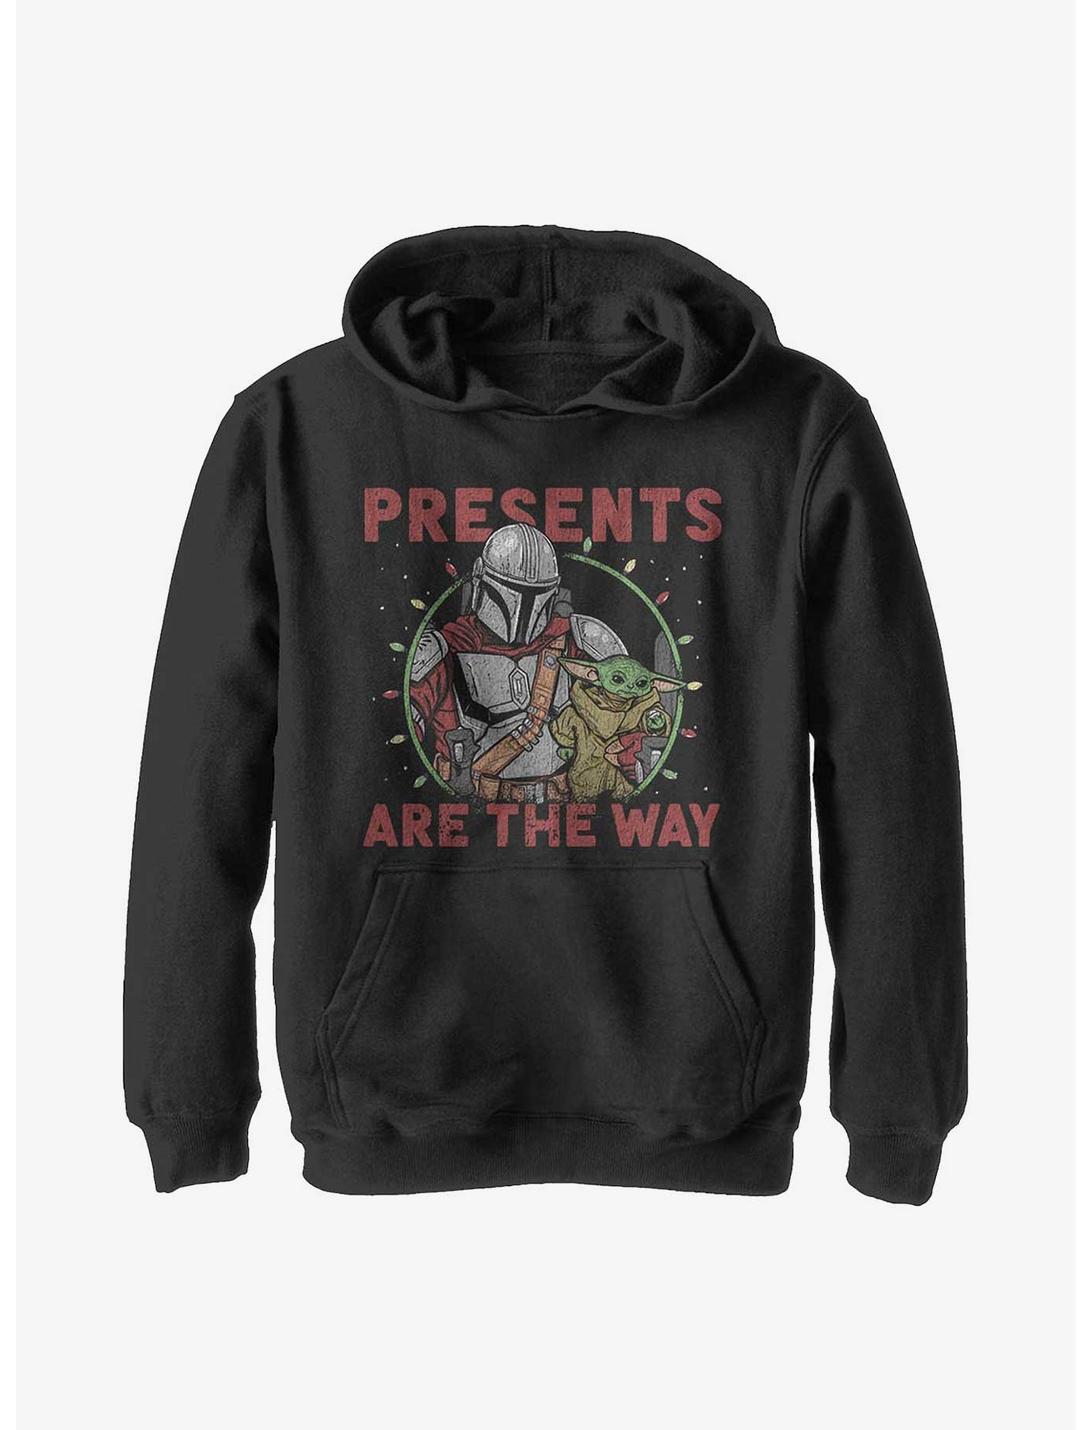 Star Wars The Mandalorian Presents Are The Way Youth Hoodie, BLACK, hi-res